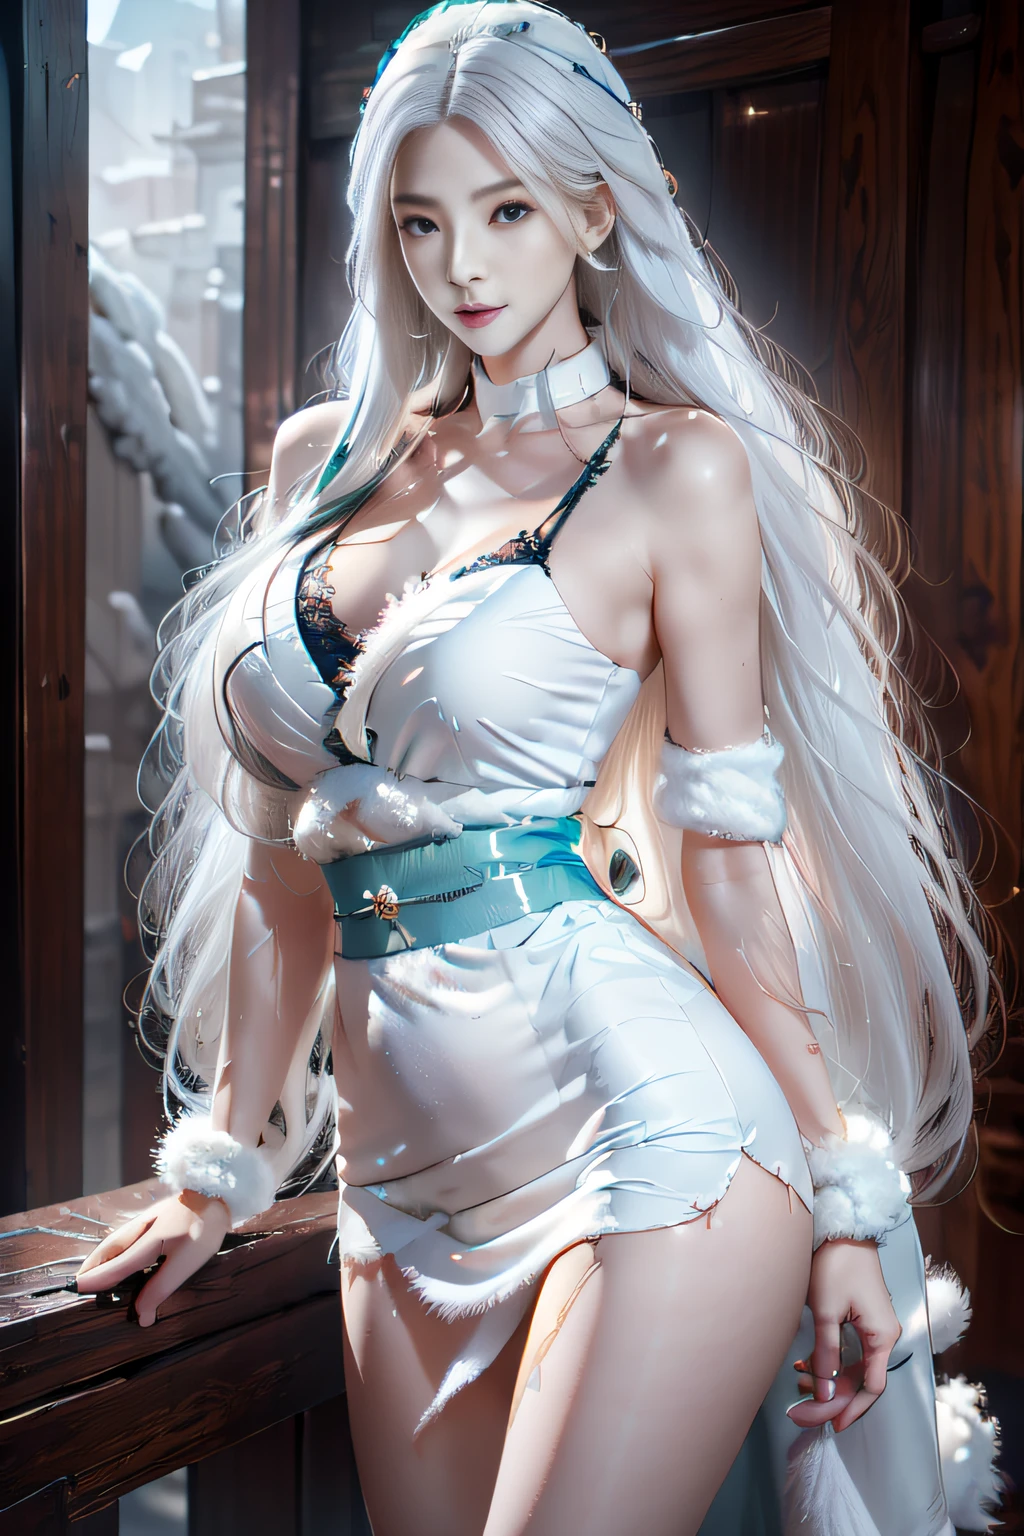 Dark fantasy, Full body shot, 1 Lady, White and light green_blue kimono, (Inverted triangle shaped face:1.1), (Messy and fluffy long white hair，Freeze motion:1.22), hair lighting, Dignified Expression, Smile, Blazing smoky snow-white eyes, Sky blue nails, sandals, (Blizzard snow mountain background with bioluminescence:1.2), crayon art, Oil painting coloring, catch light, Smooth and flawless skin, fine detail skin, Dynamic pose, Rich palette of dark tones, Intricate detail textures, intricately details, Tonal contrast, toon rendering, Super fine illustration, hyper qualit, Best quality, High quality, insanely details, 16k, Extremely detailed,